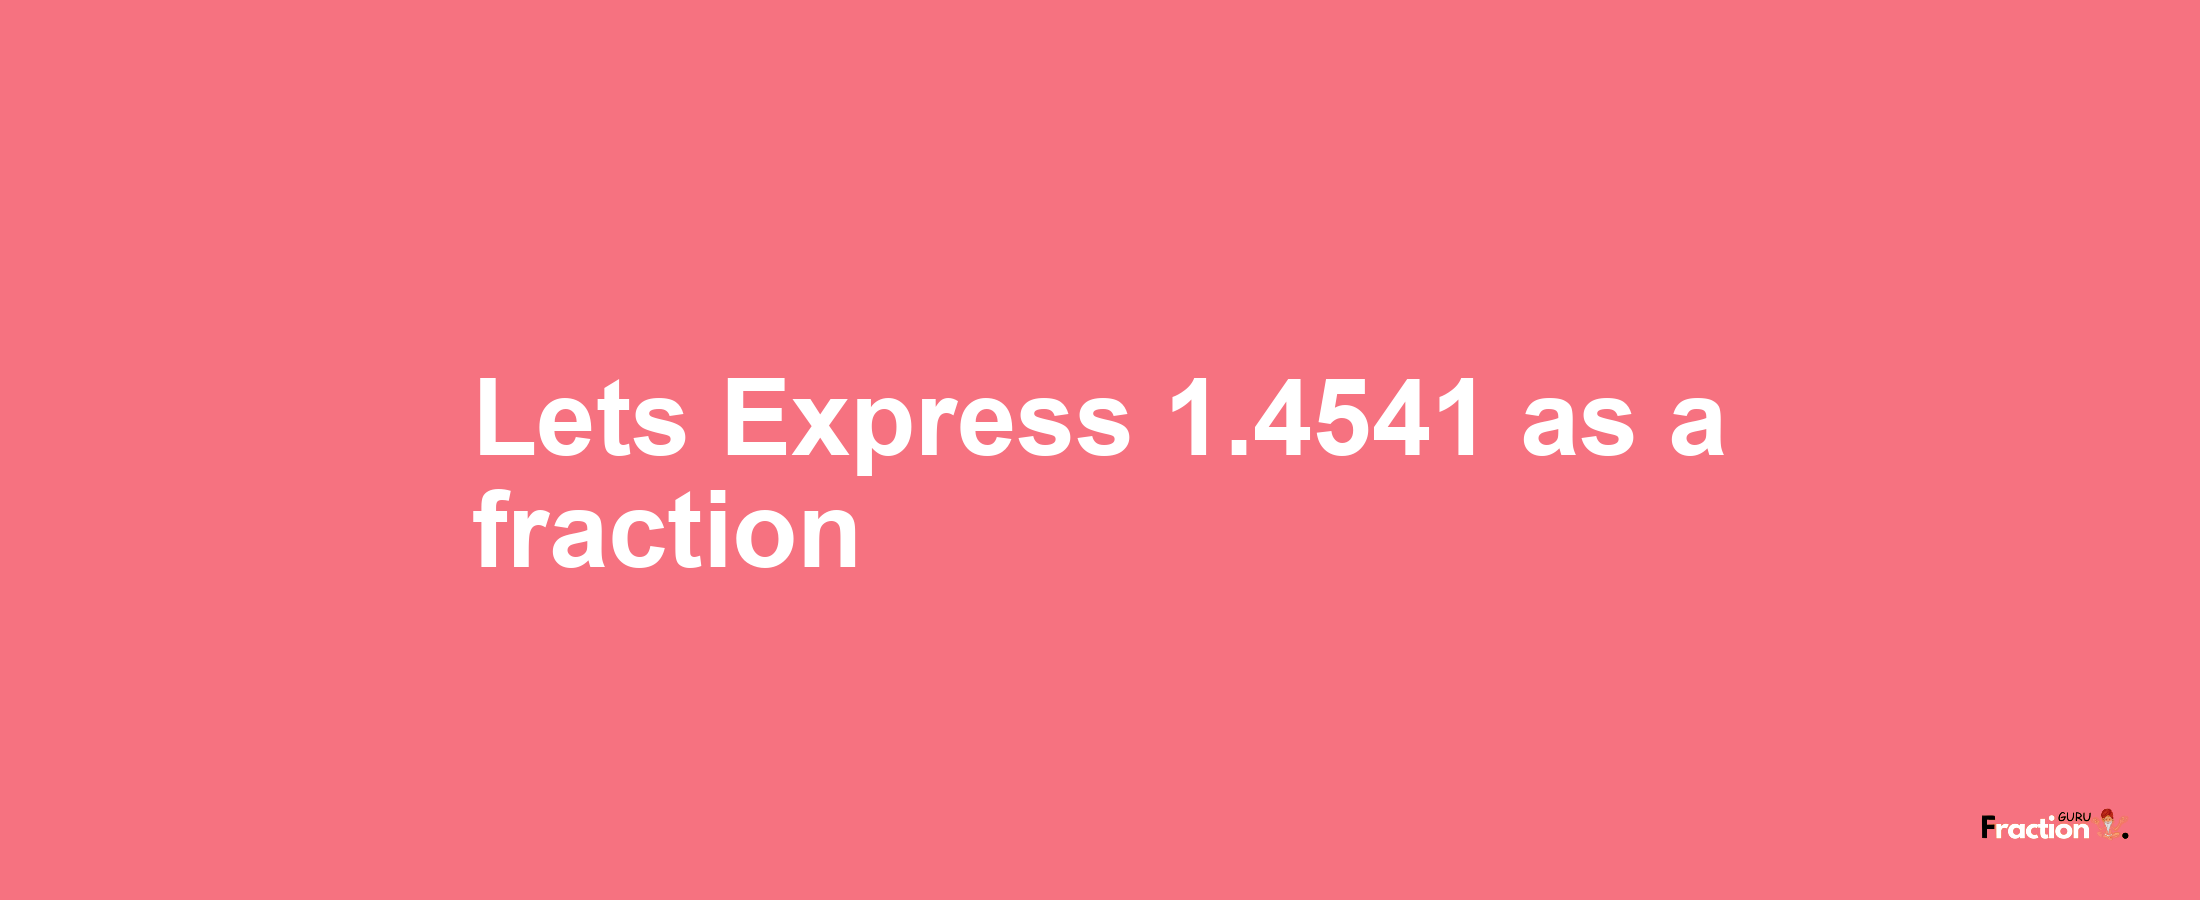 Lets Express 1.4541 as afraction